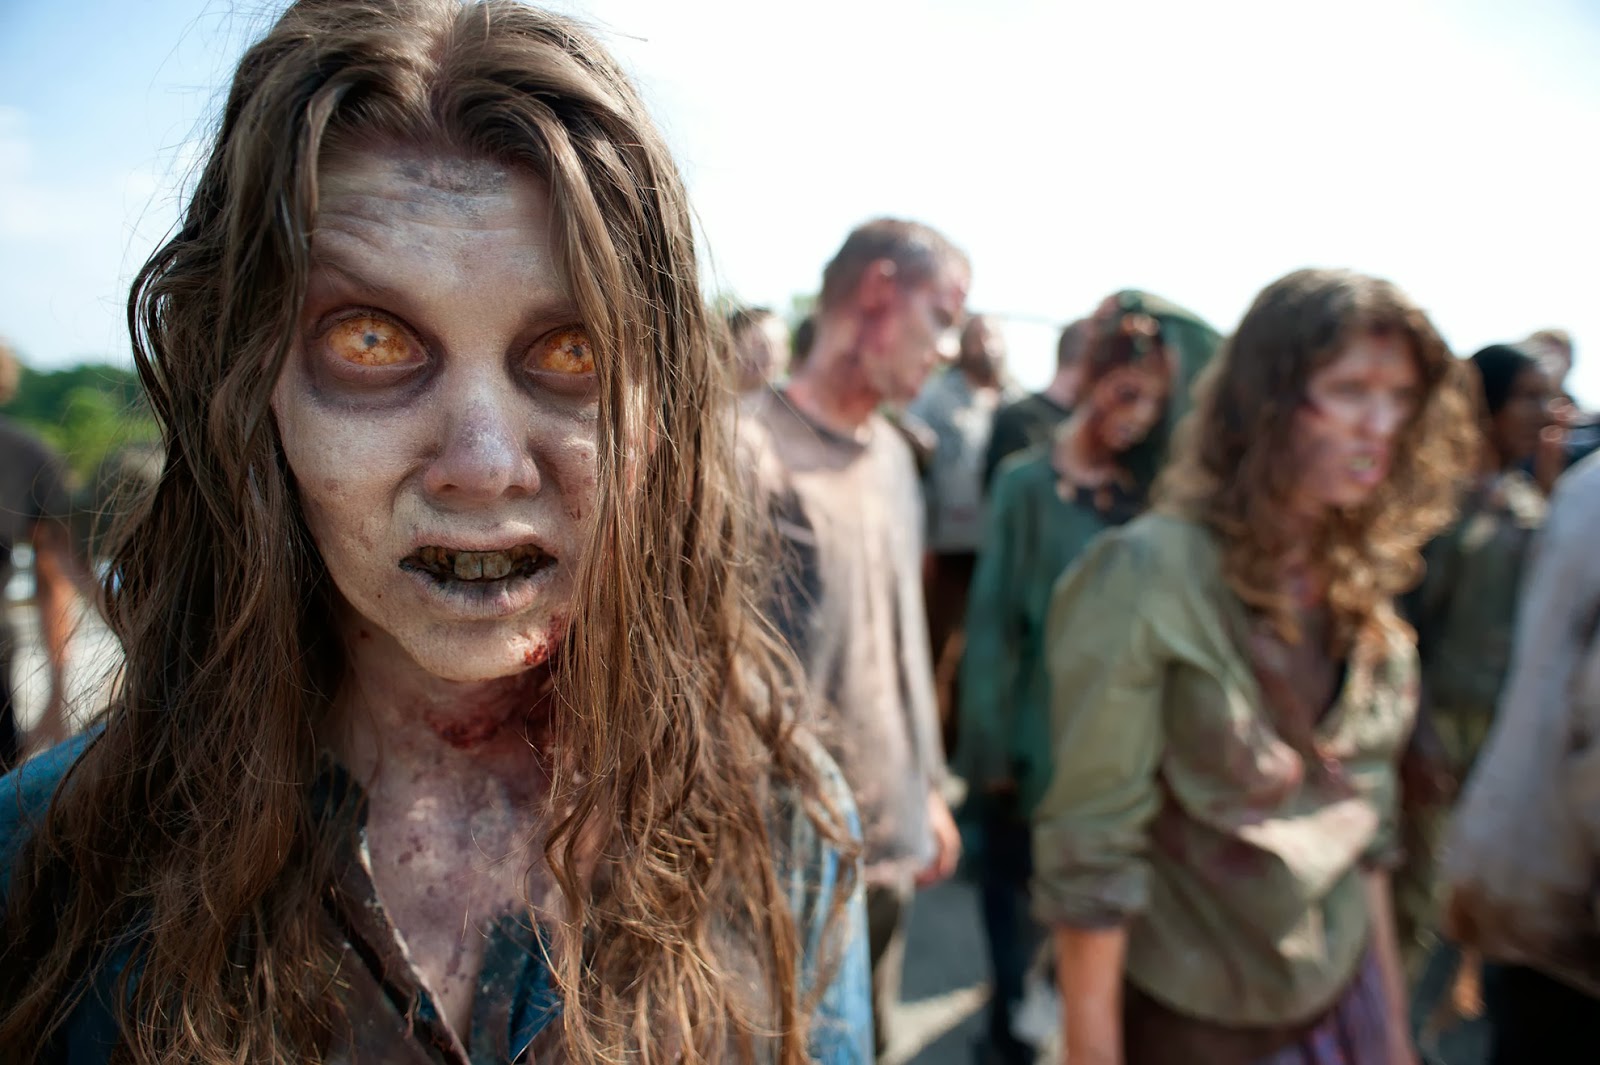 Zombies HD Wallpapers, Zombie pictures, zombies images,